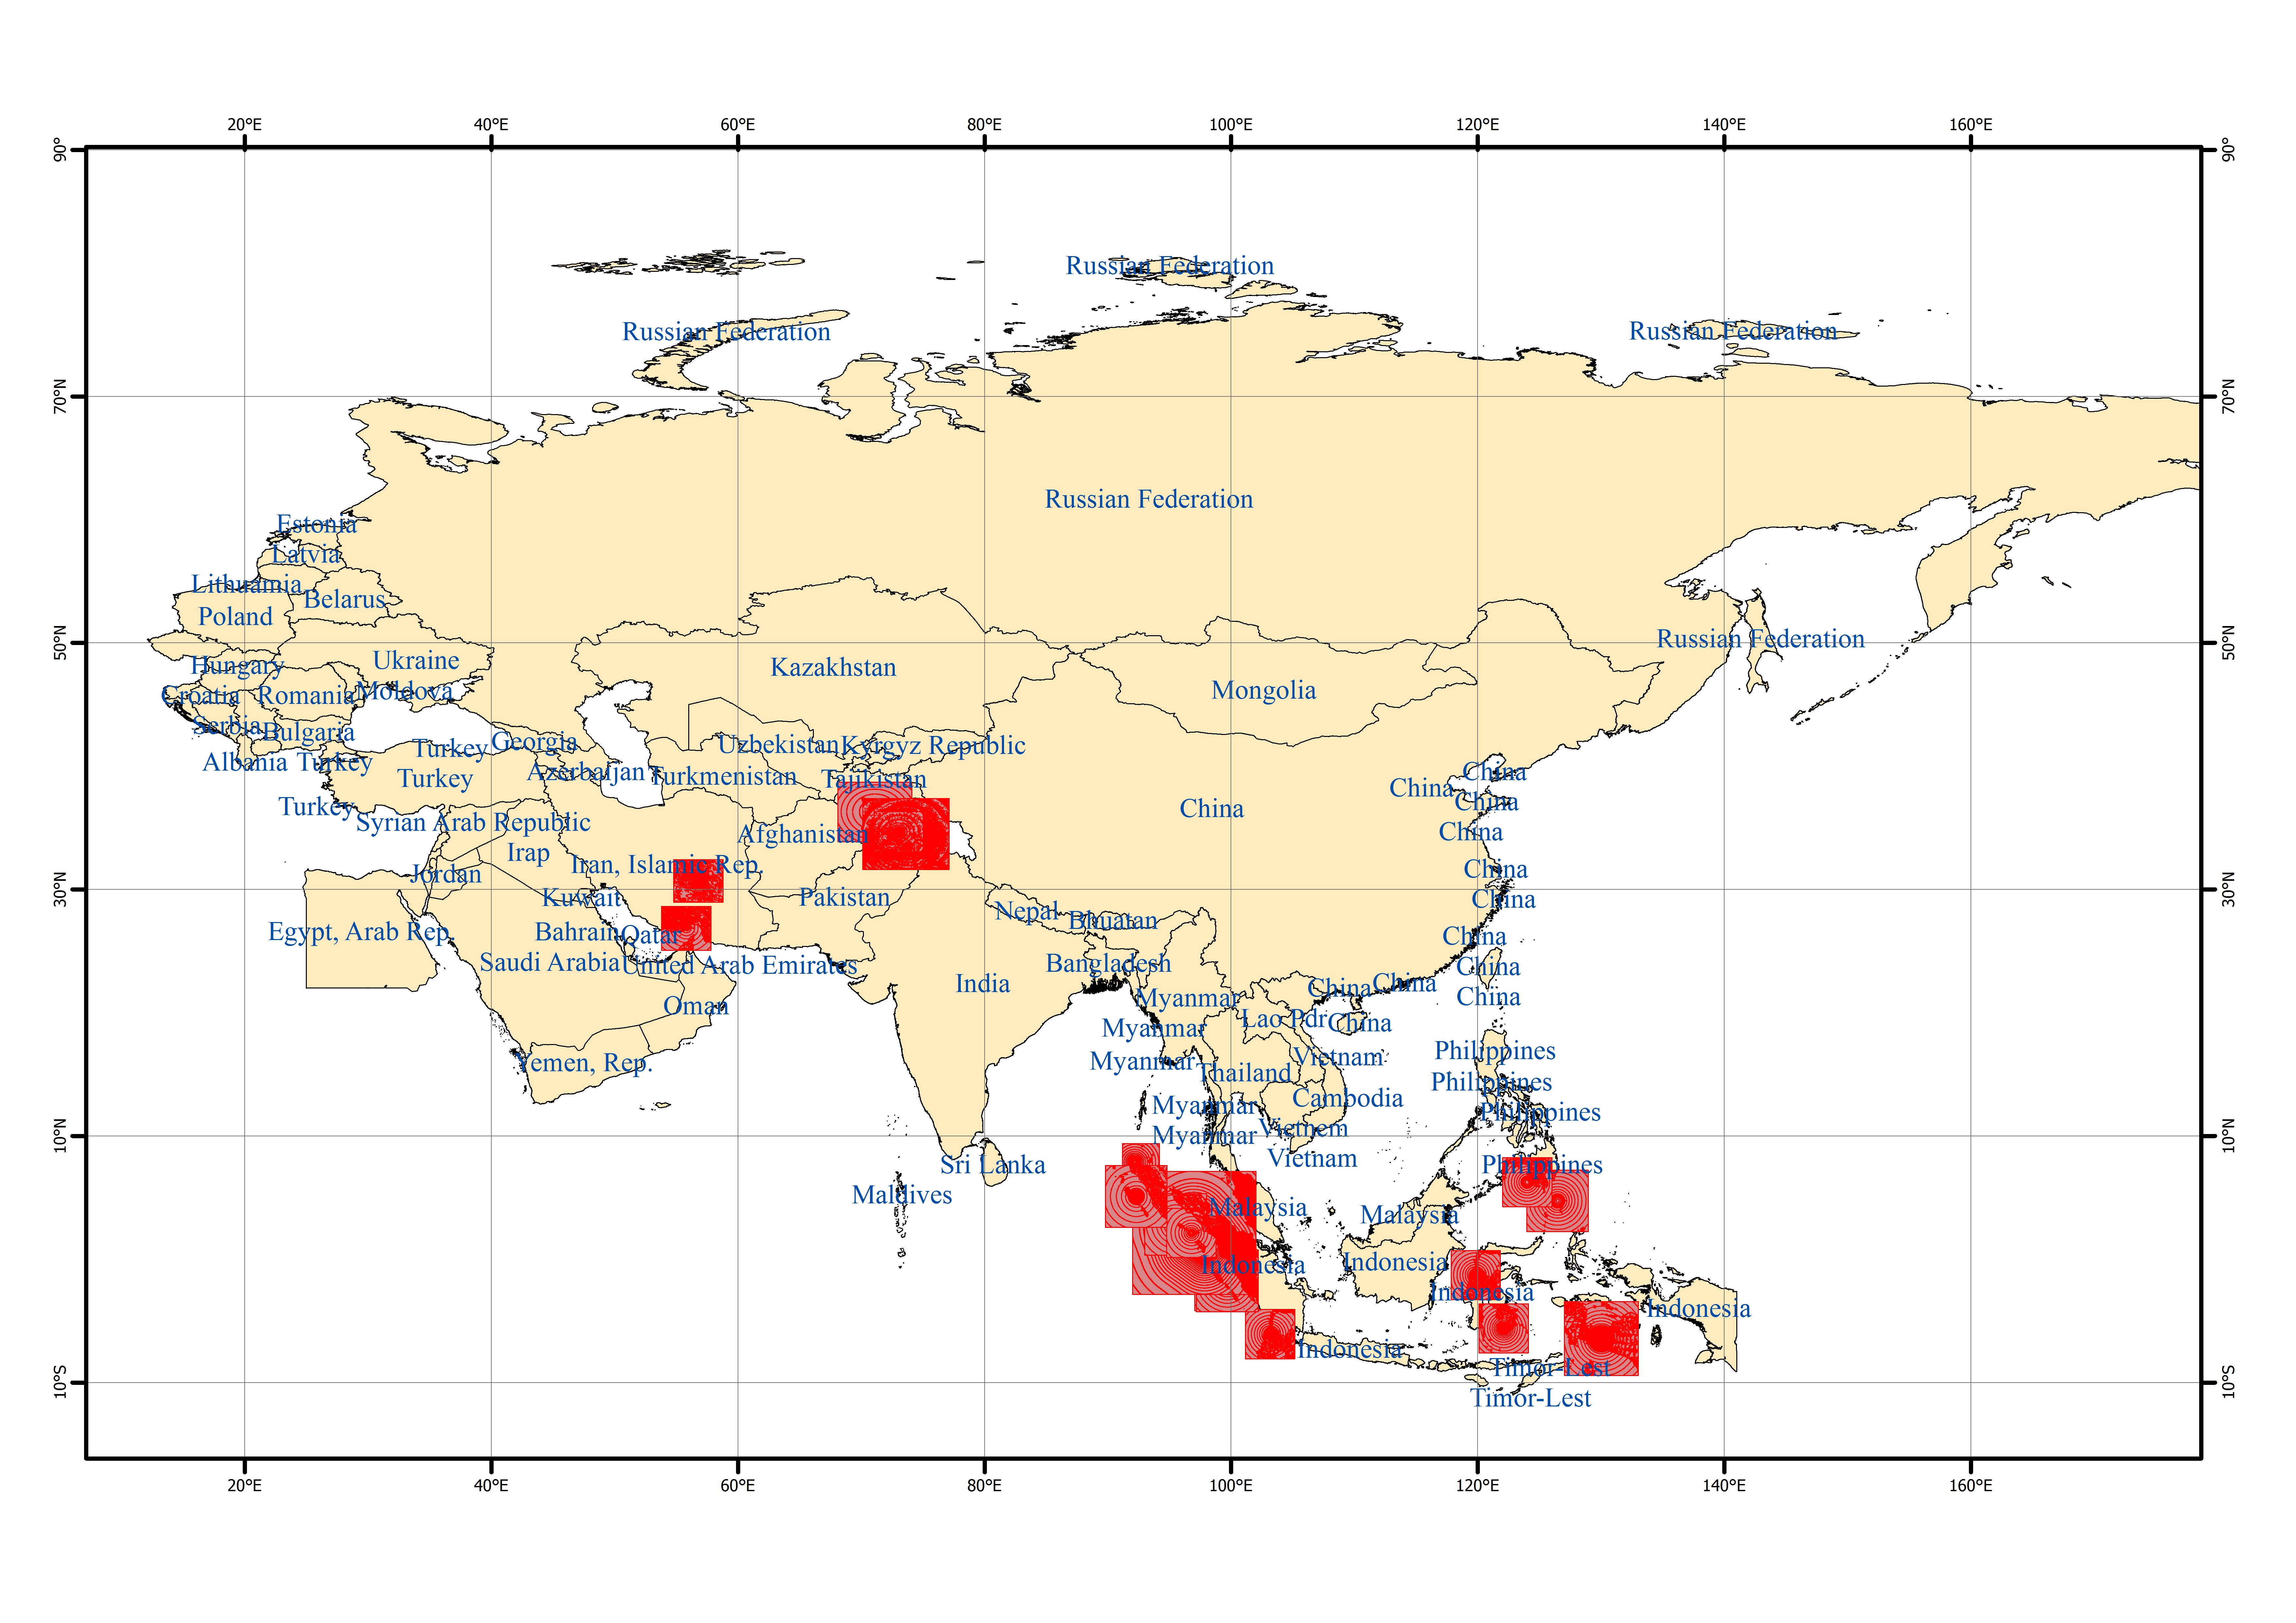 Spatio-temporal Distribution of Earthquake Disaster in the Belt and Road Area of 2005